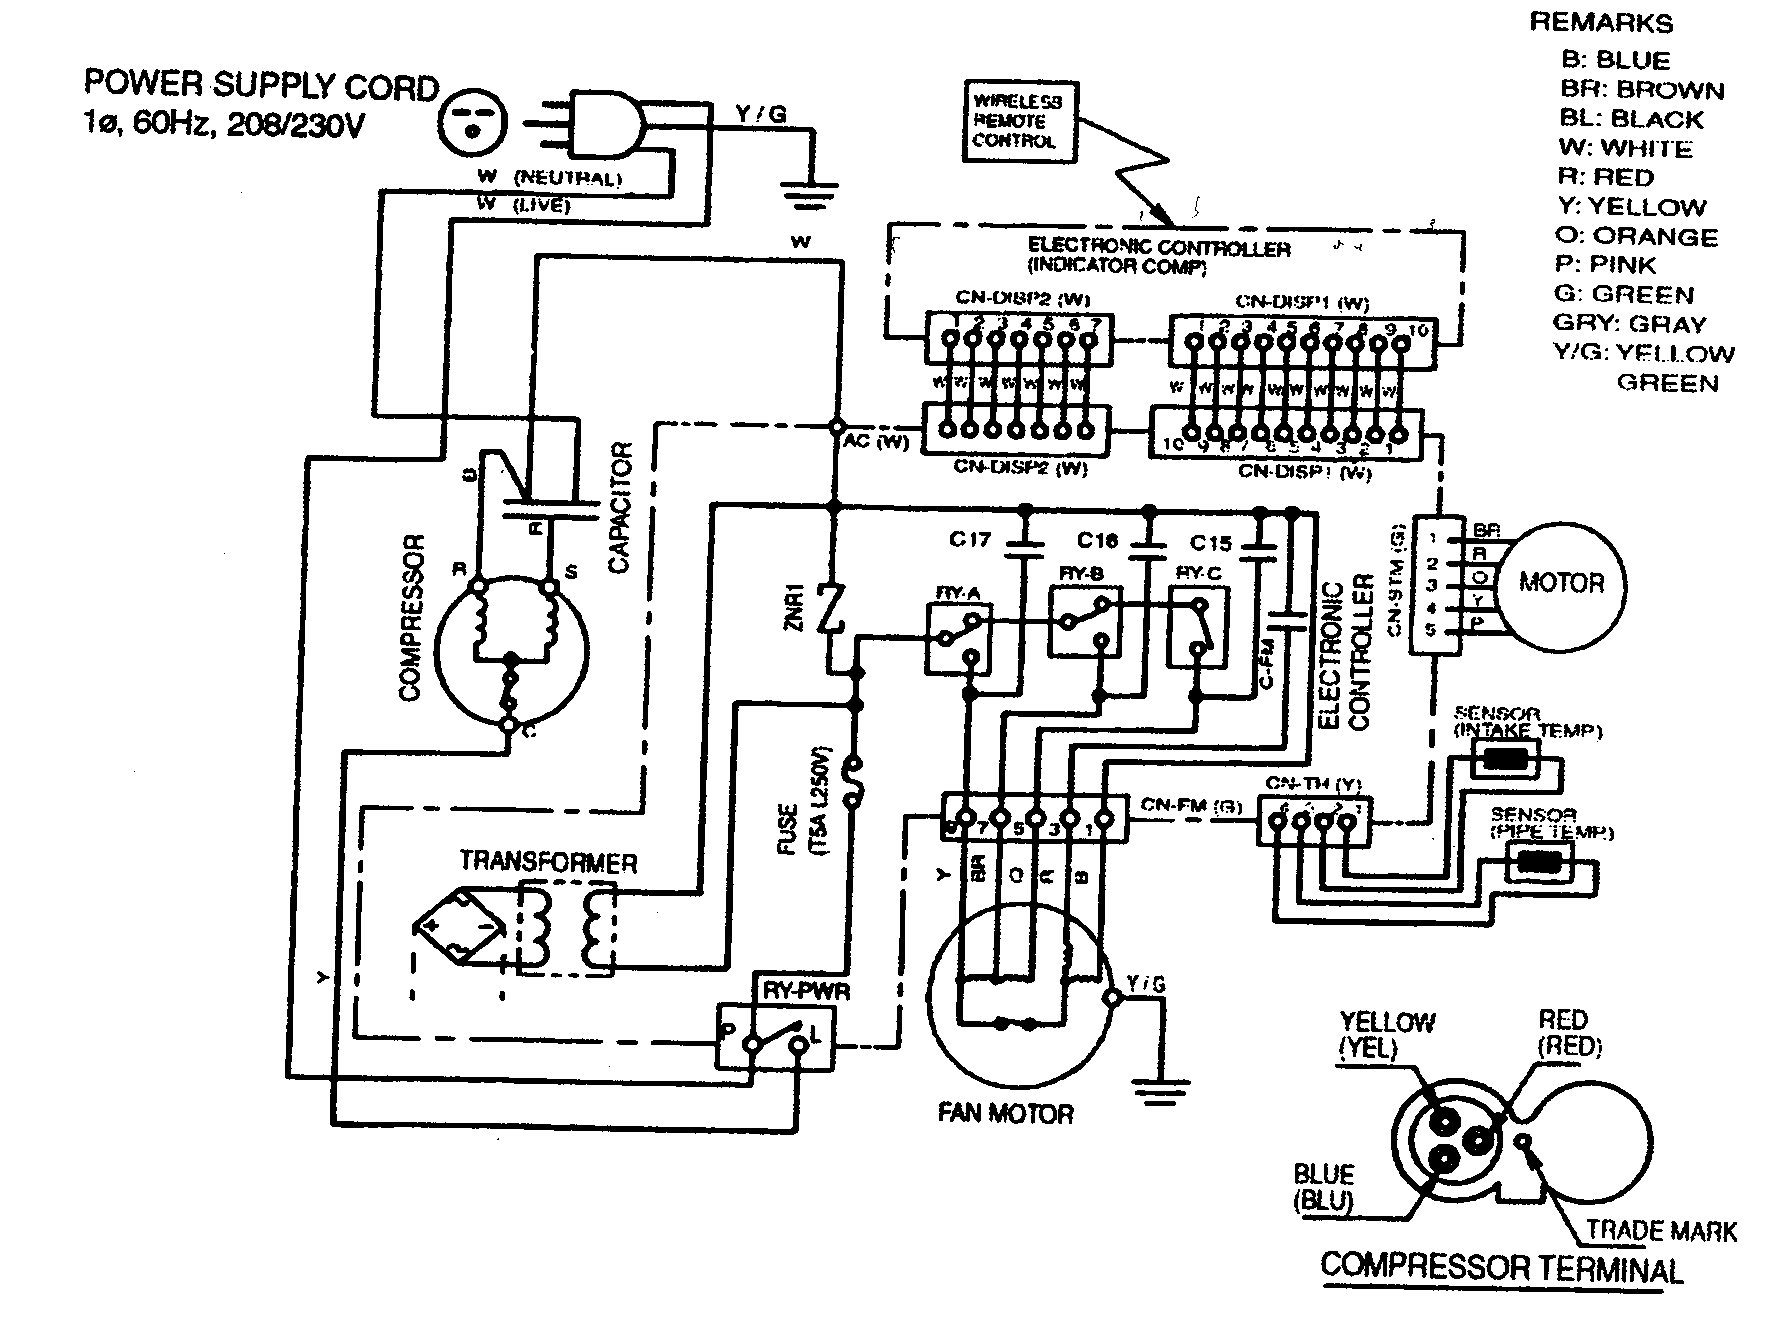 Central Air Conditioning Wiring Diagram from c.searspartsdirect.com